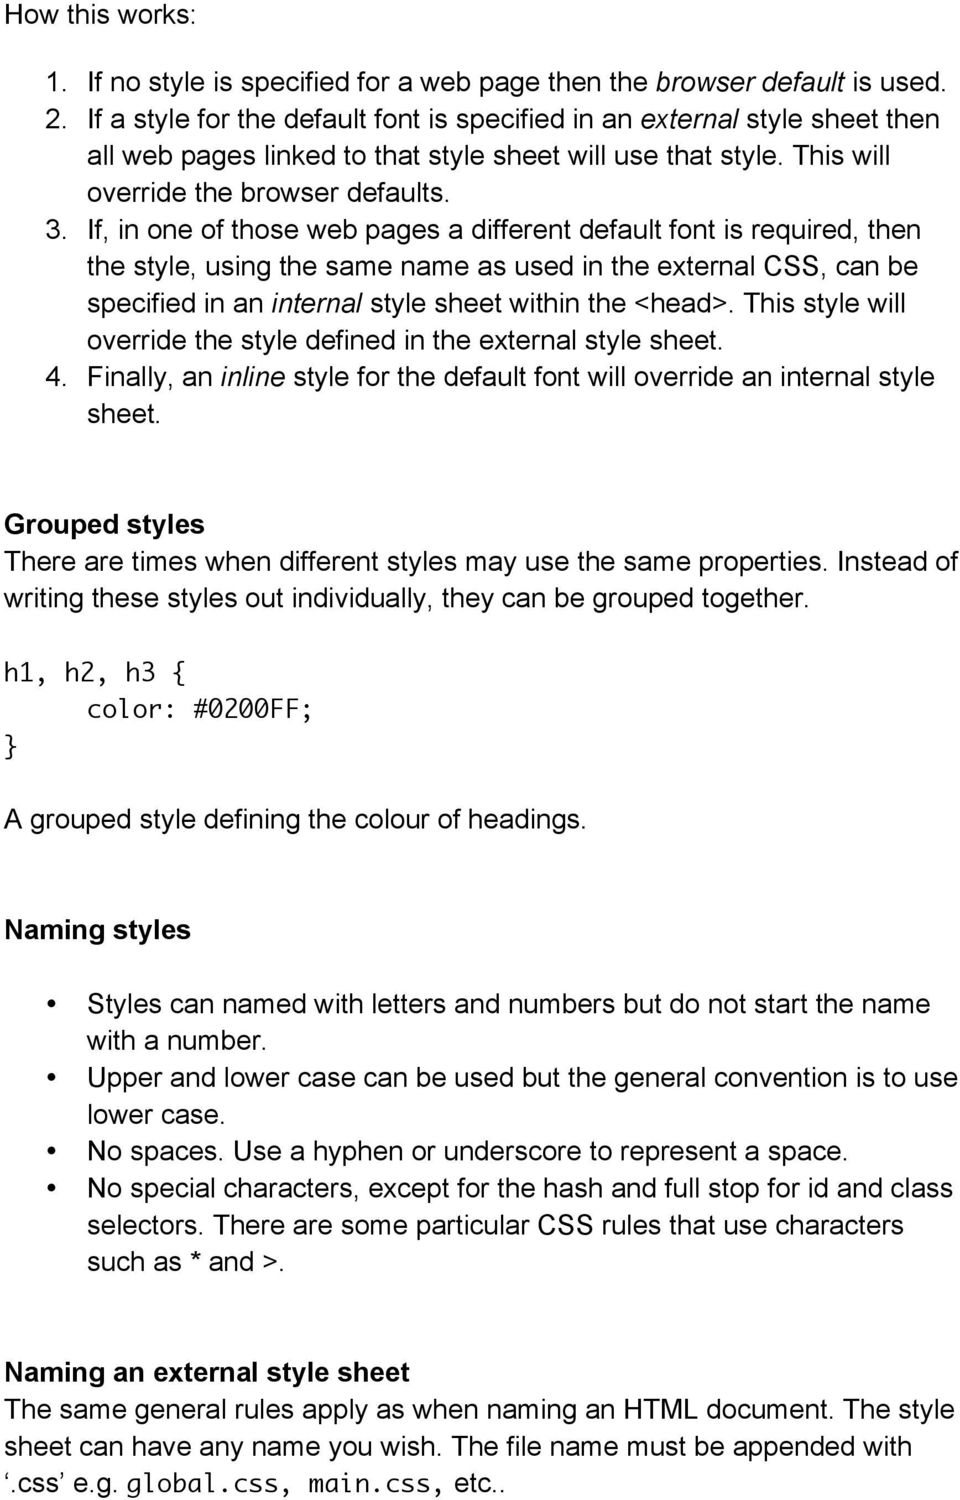 If, in one of those web pages a different default font is required, then the style, using the same name as used in the external CSS, can be specified in an internal style sheet within the <head>.